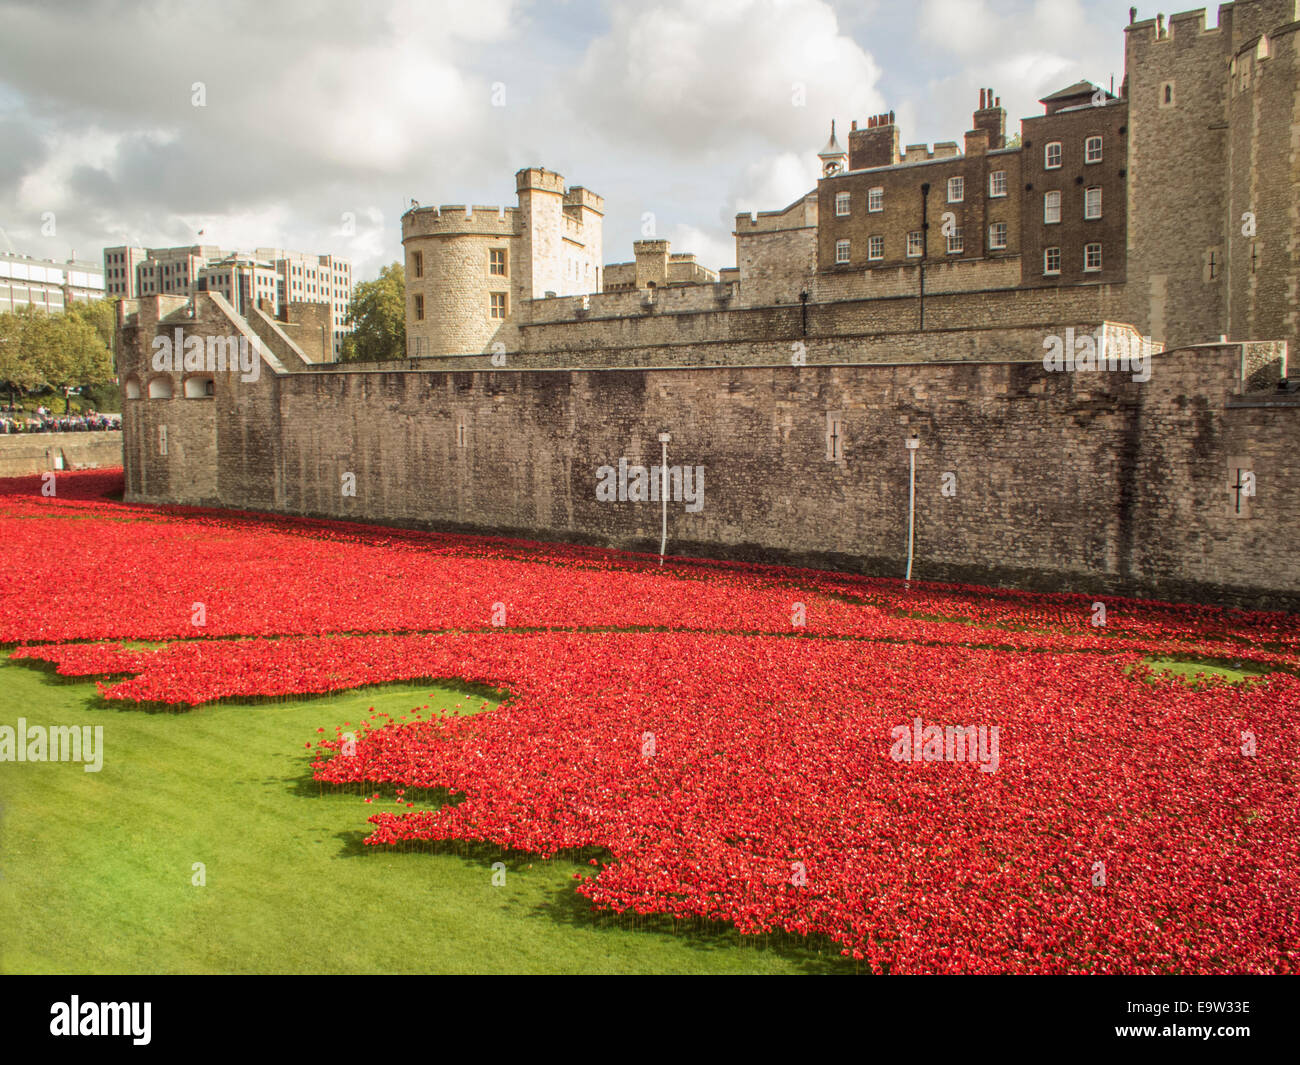 Blood swept lands and seas of red. The poppies at the Tower of London. Very poignant  reminder of our 1st world war ,dead. Stock Photo